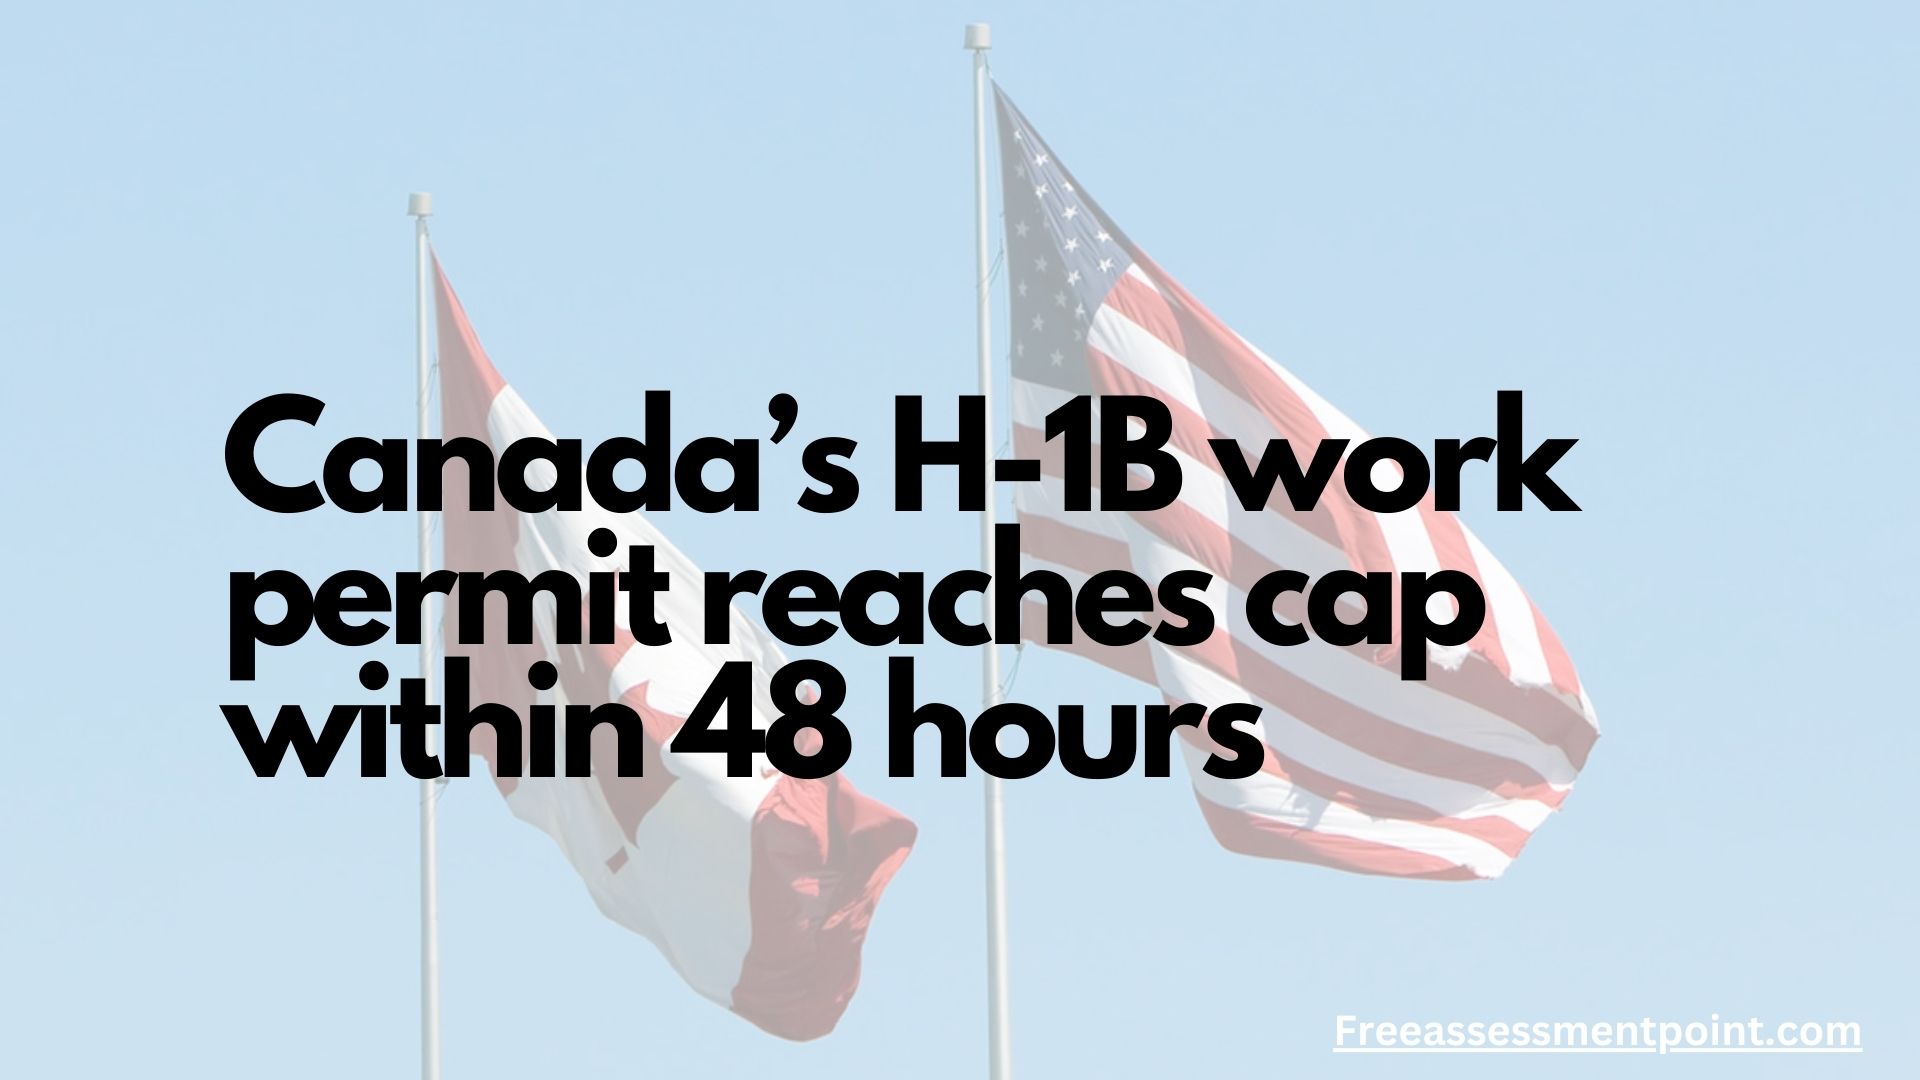 Canada’s H-1B work permit reaches cap within 48 hours